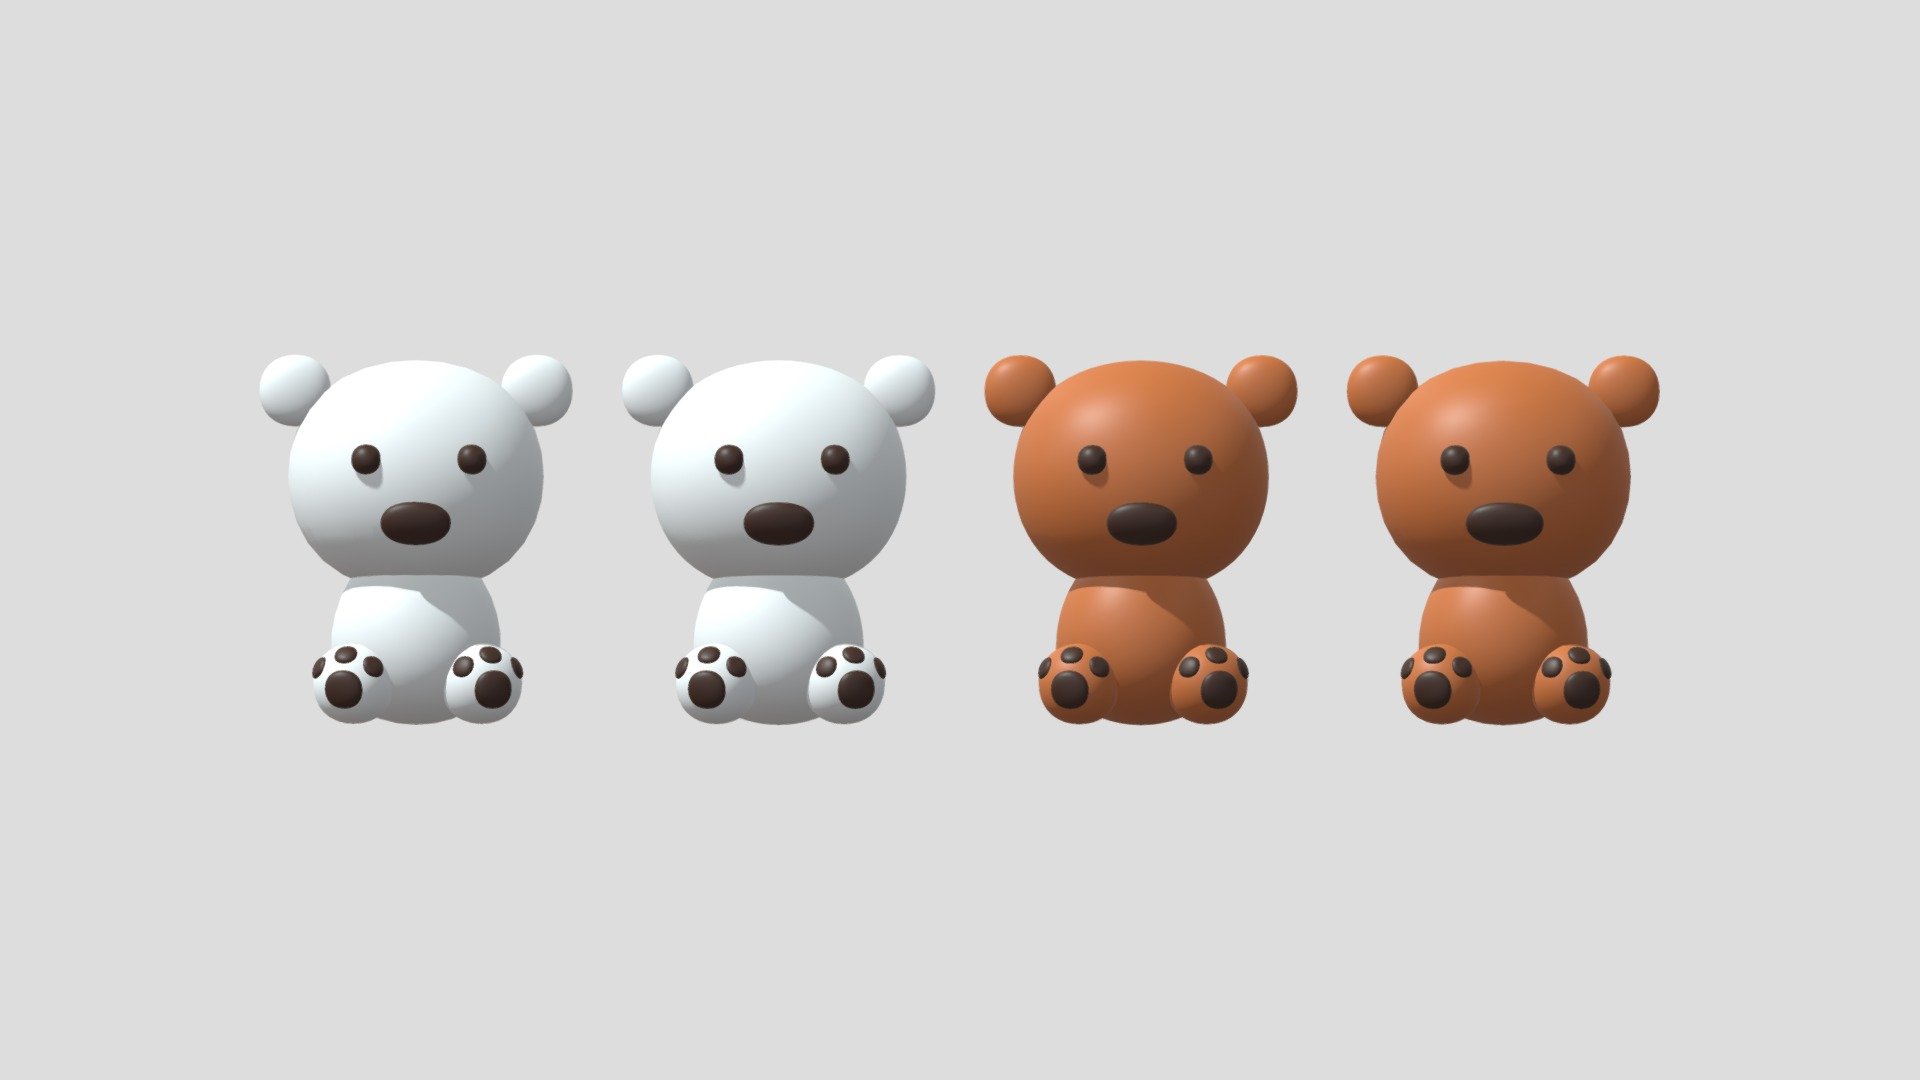 -Cartoon Cute Bear Head.

-This product contains 32 objects.

-High Poly : Verts : 14,288 Faces : 14,336.

-Mid Poly : Verts : 5,456 Faces : 5,504.

-Materials and objects have the correct names.

-This product was created in Blender 2.935.

-Formats: blend, fbx, obj, c4d, dae, abc, stl, glb, unity.

-We hope you enjoy this model.

-Thank you 3d model